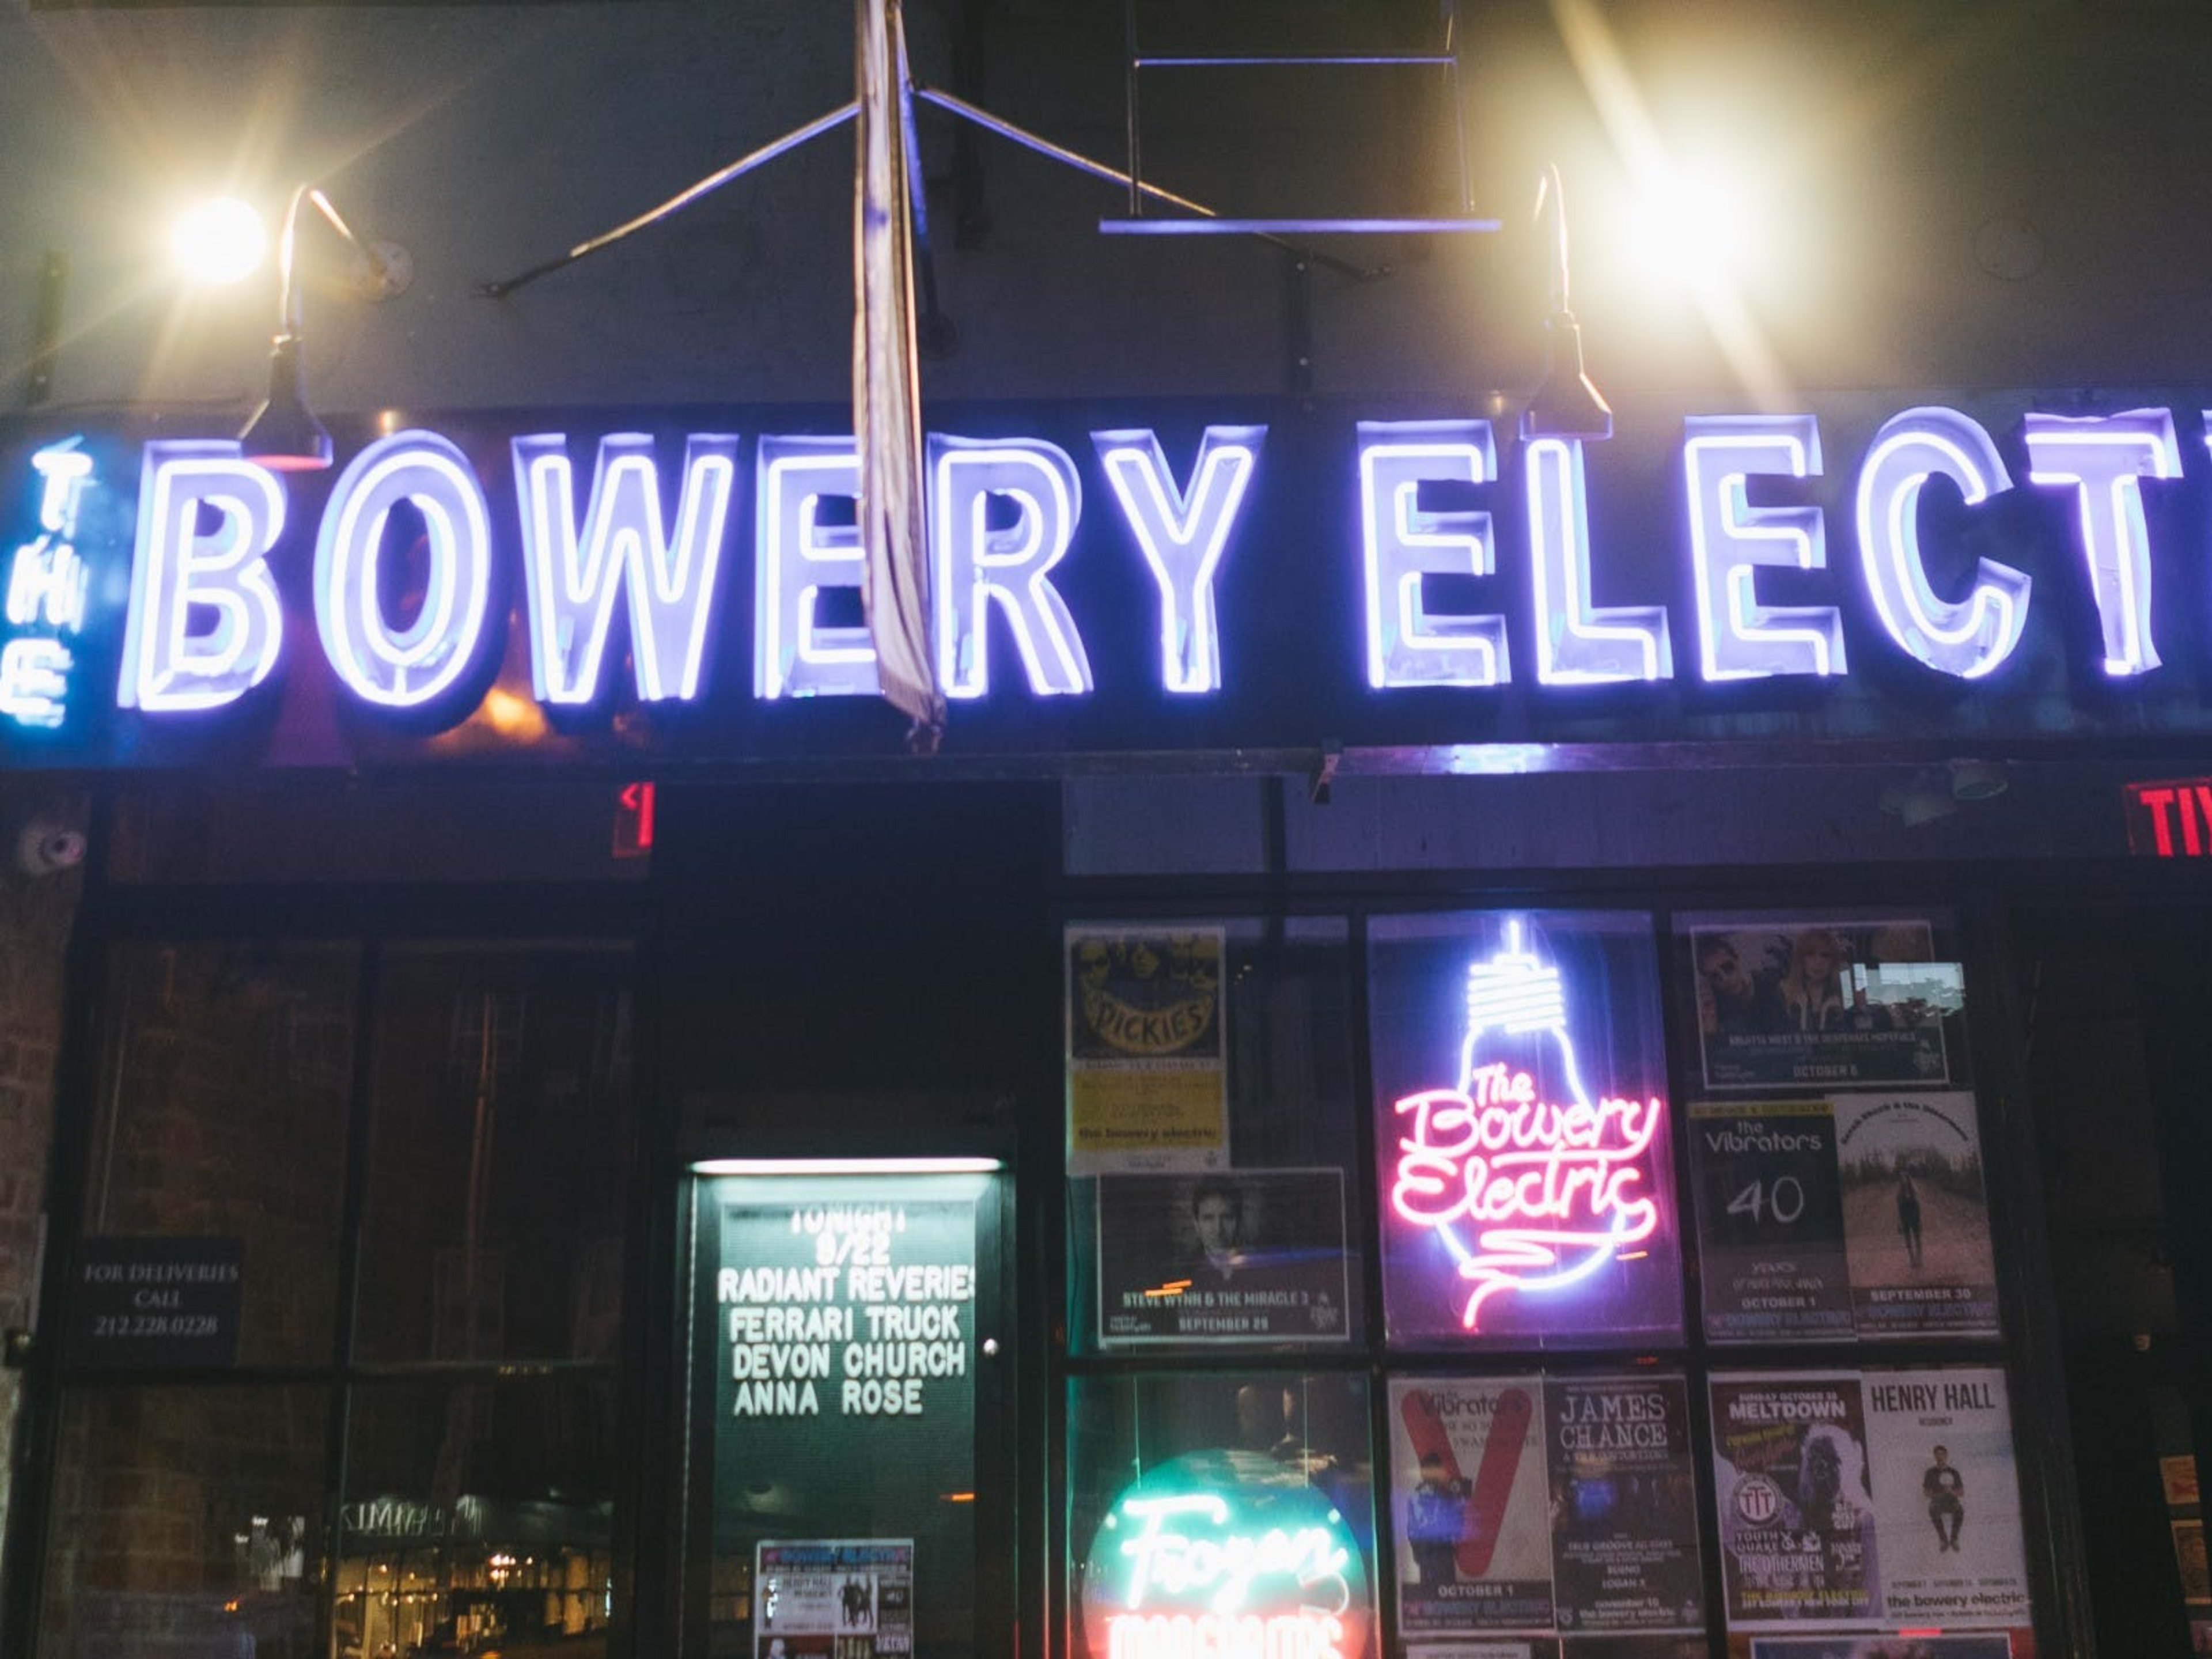 The Bowery Electric image